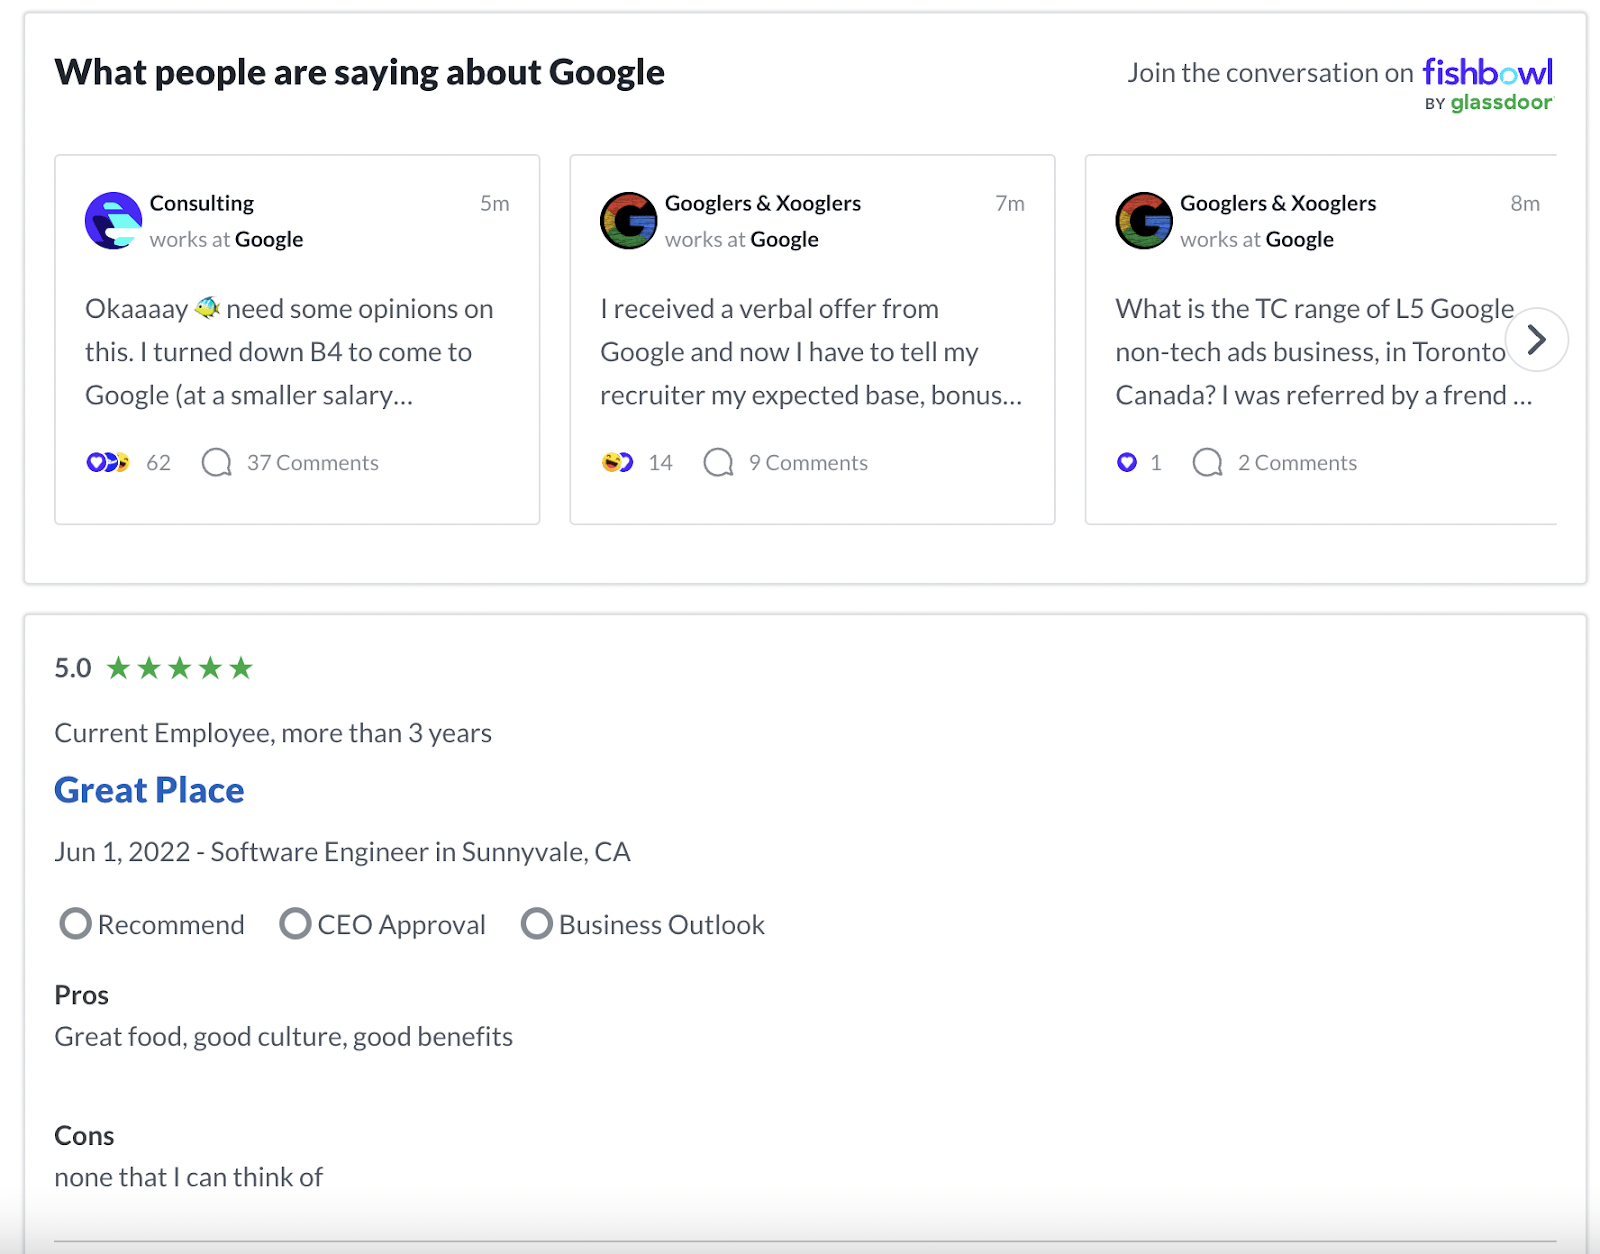 What people are saying about google. Four reviews including a 5 star rating and some pros and cons.